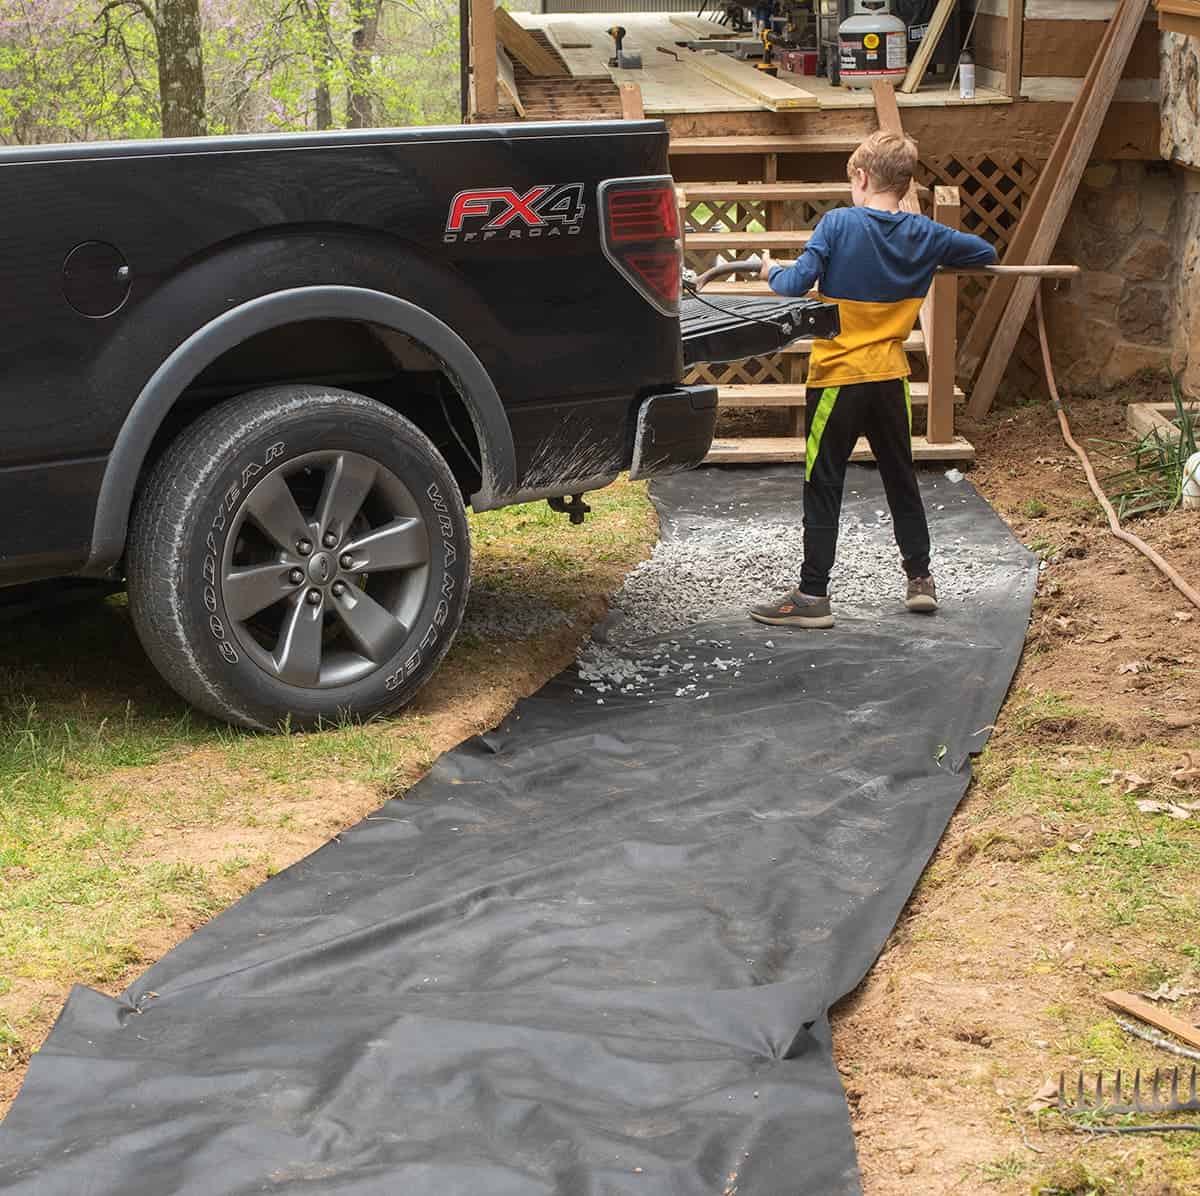 Shoveling gravel over landscape tarp to create a walkway. Gravel is being shoveled by hand directly from a pickup truck bed.